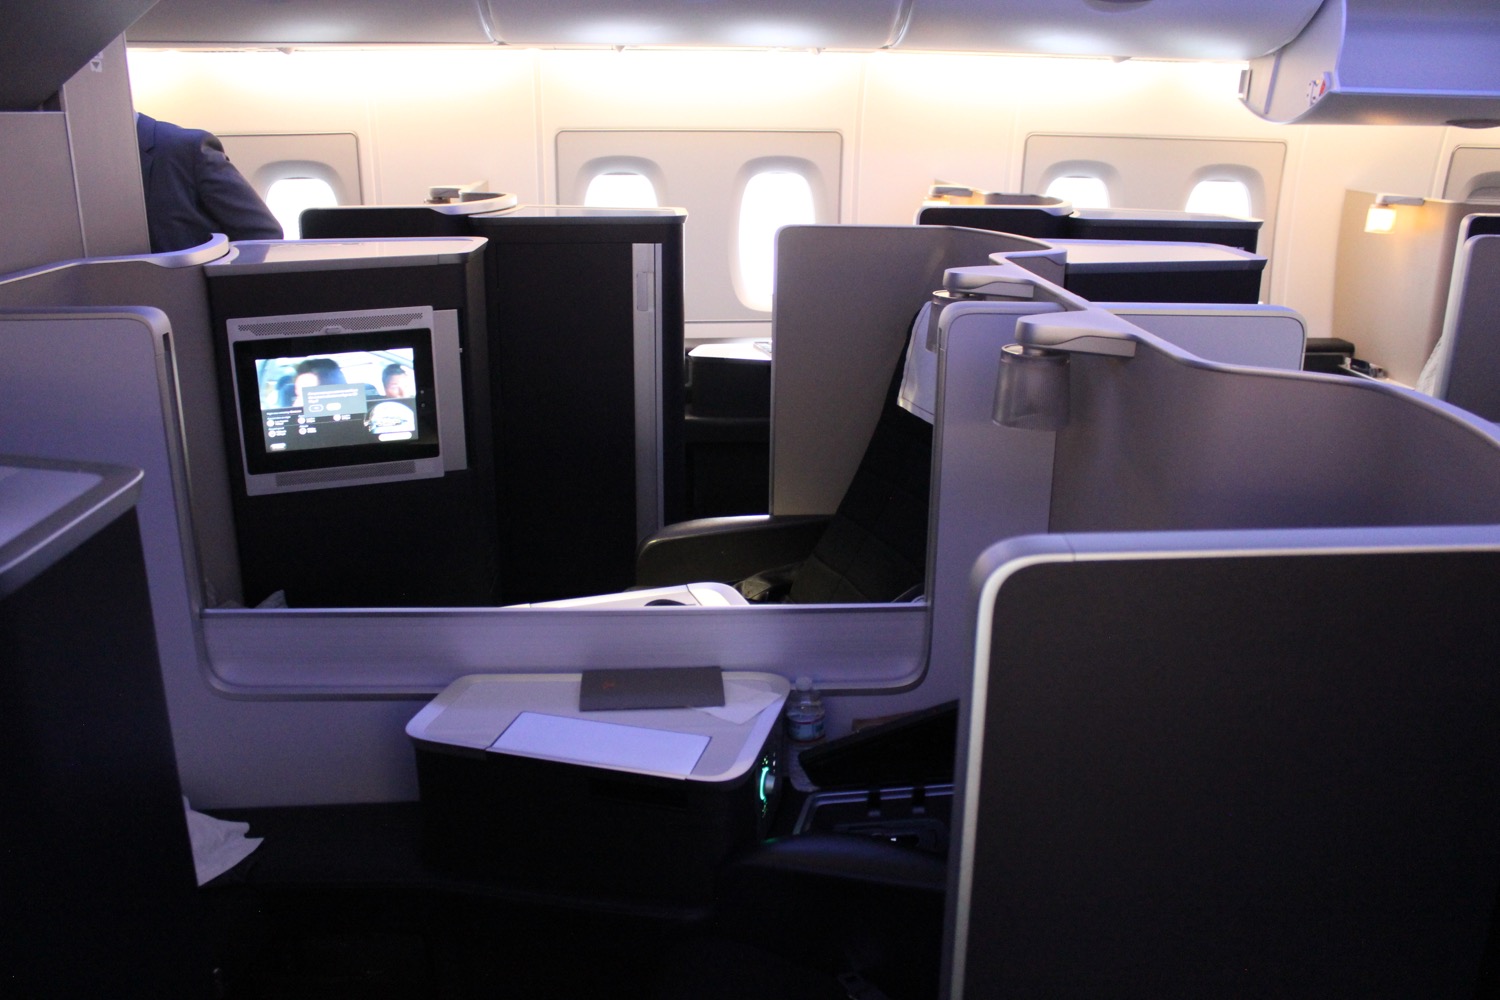 British Airways A380 First Class Review - 54